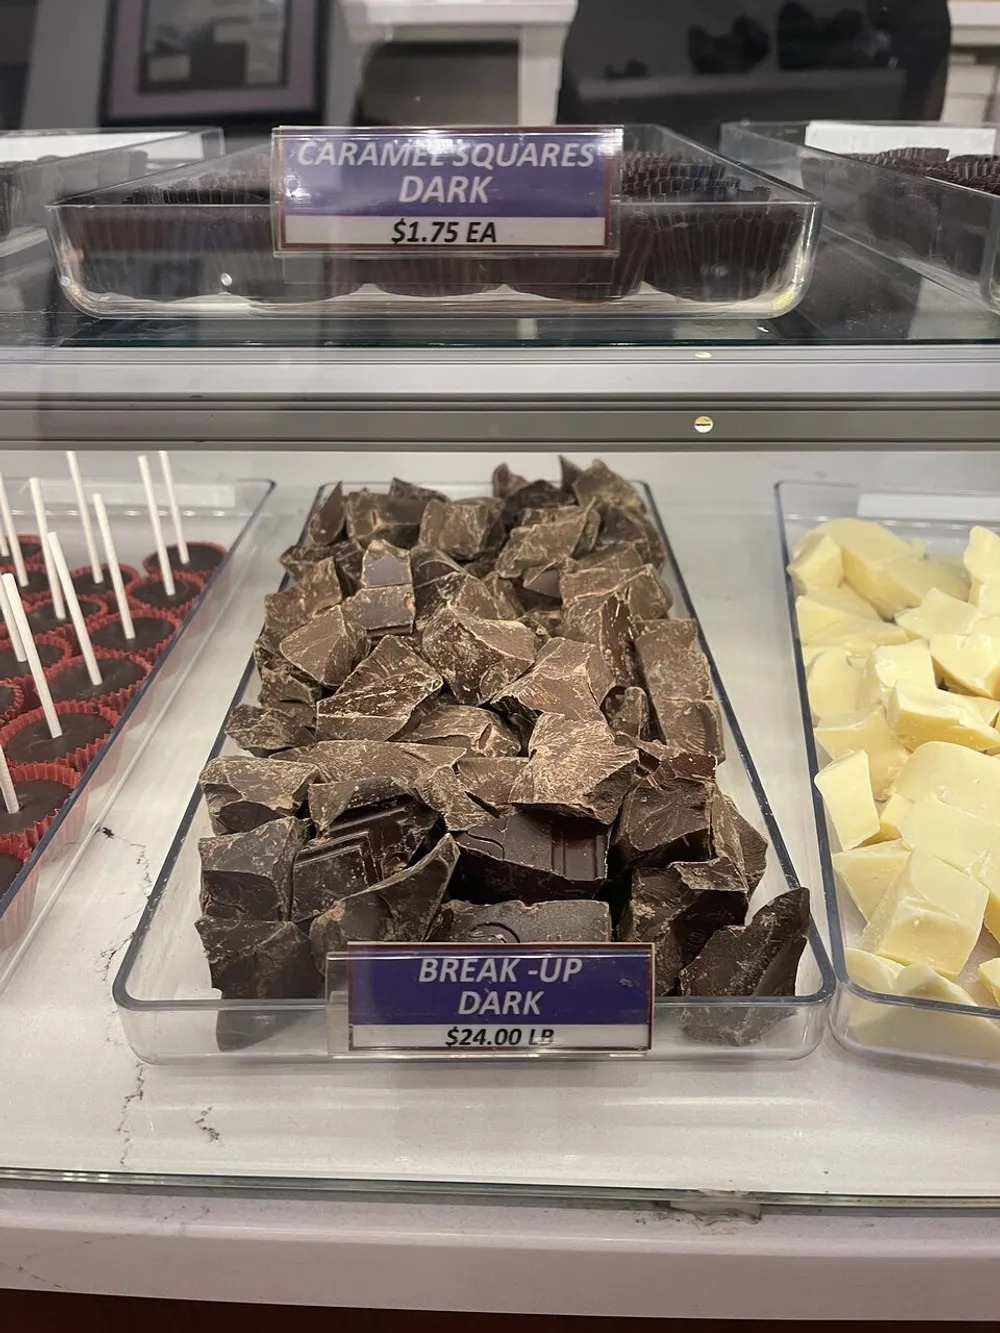 A tray filled with chunky pieces of dark chocolate labeled as Break-Up Dark for 2400 per pound is displayed in a candy store beside other confections